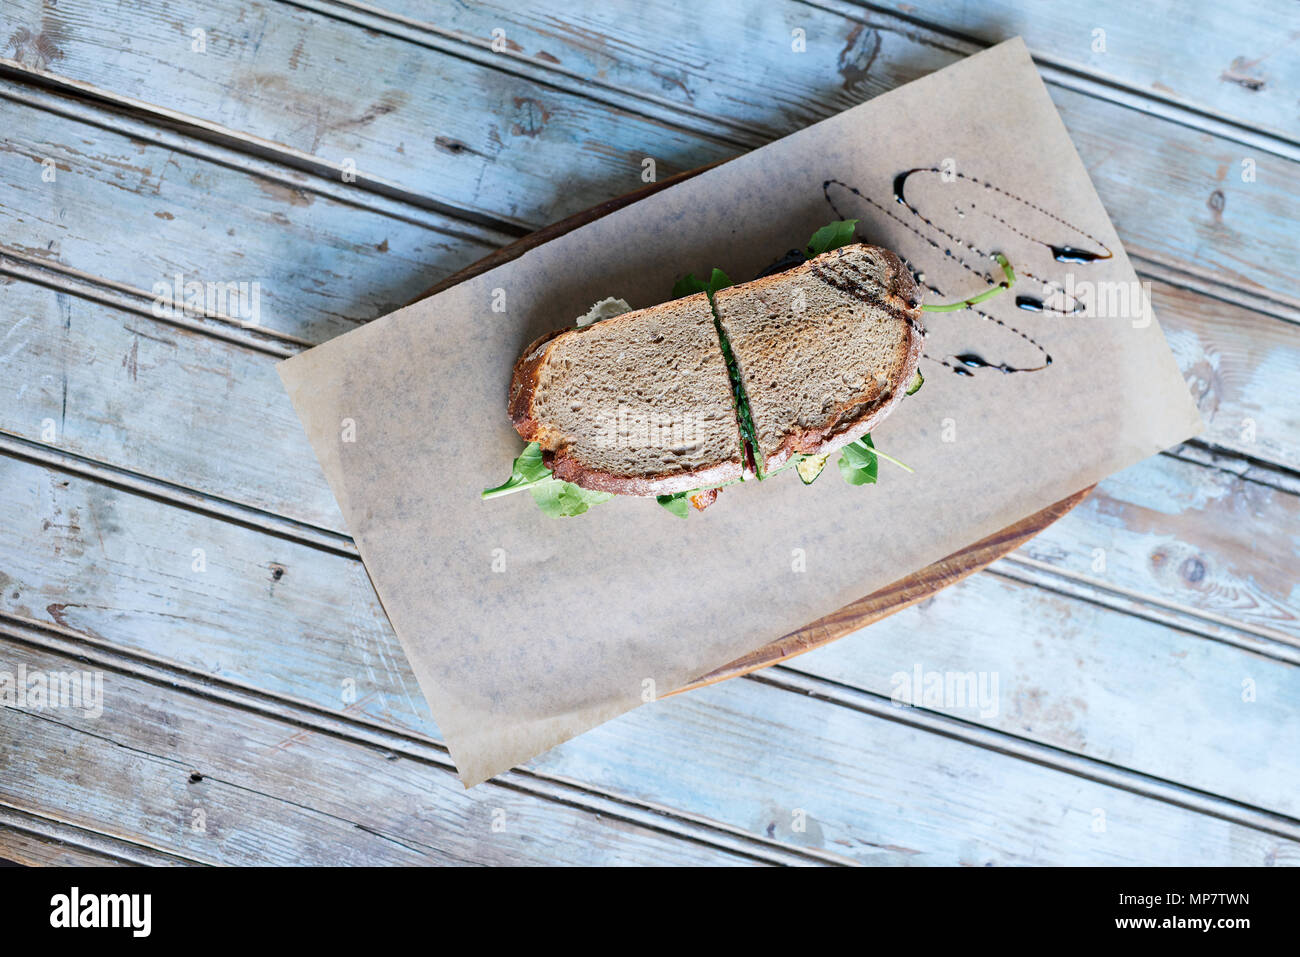 Delicious sandwich drizzled with balsalmic vinegar on a wooden table Stock Photo